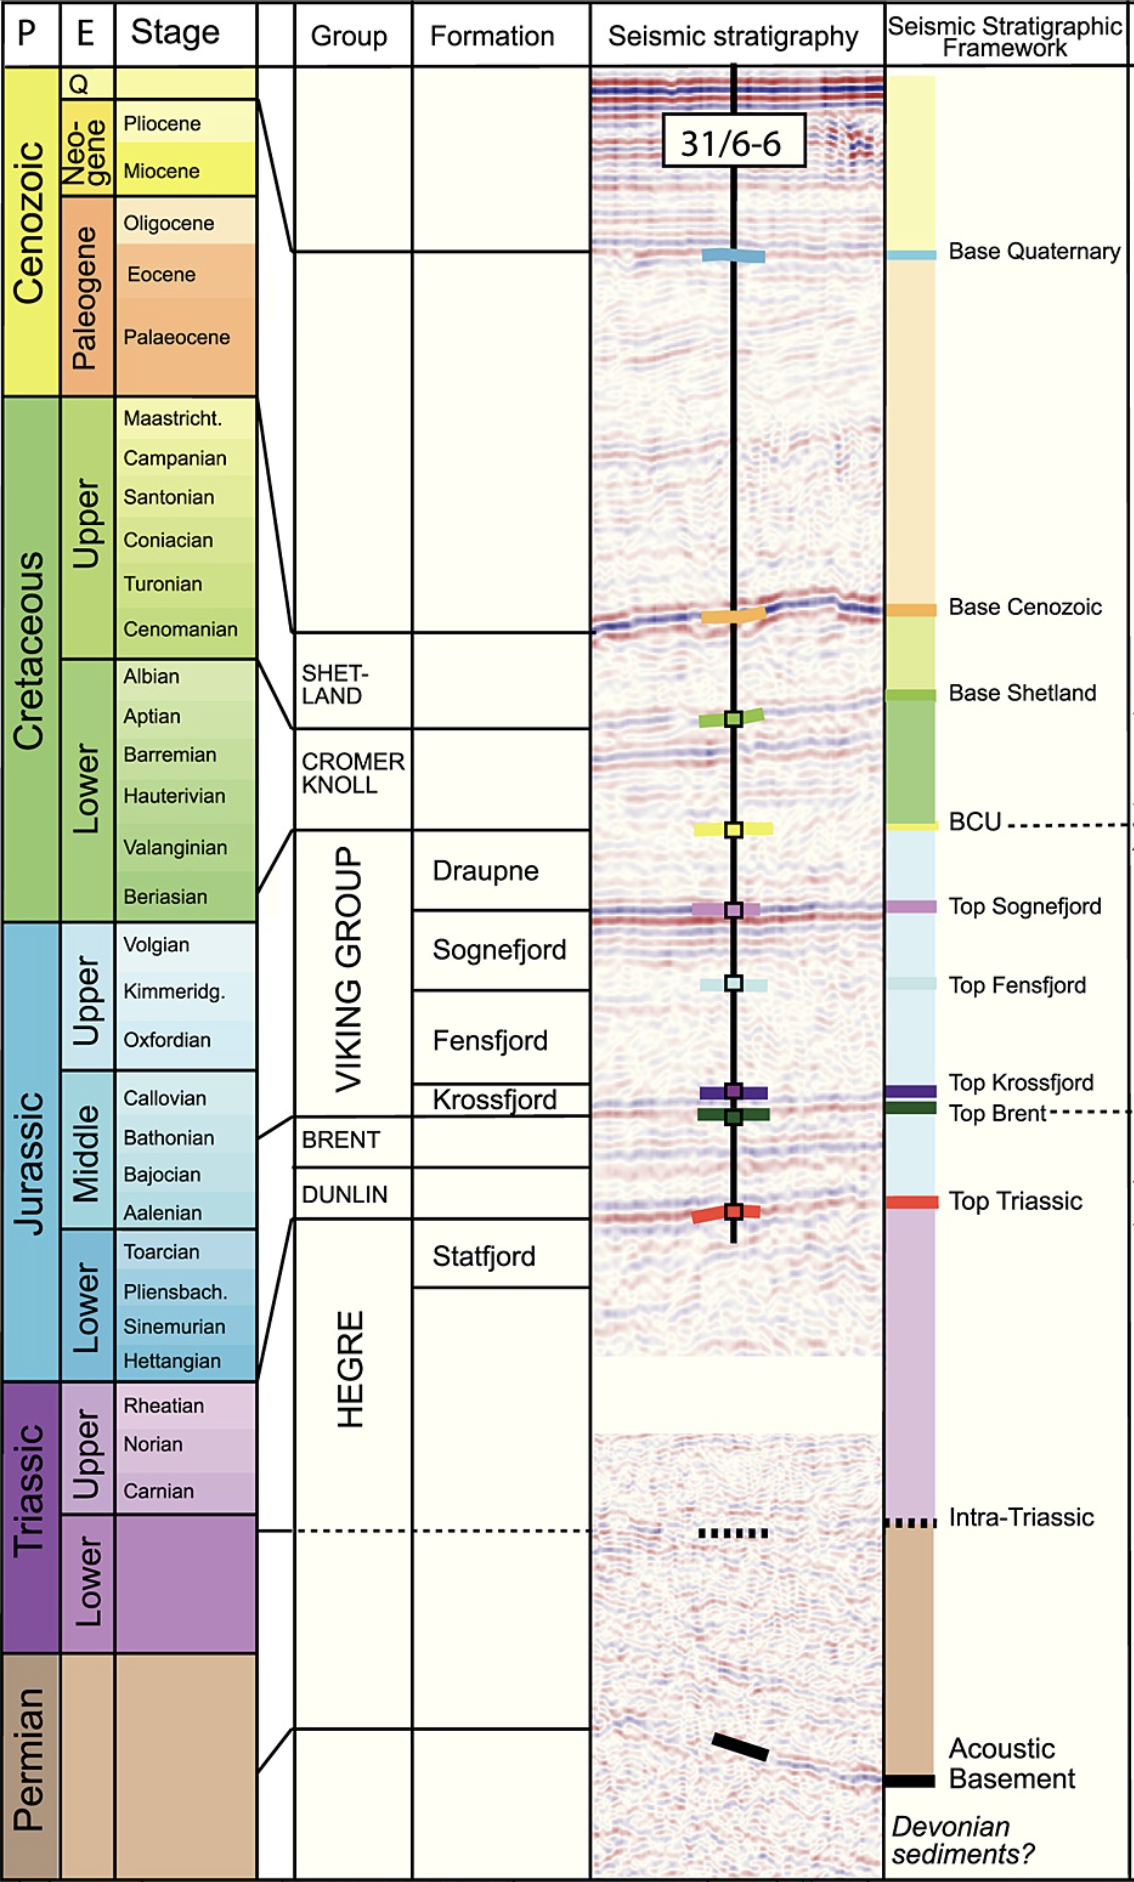 Stratigraphic column with data from well 31/6-6.